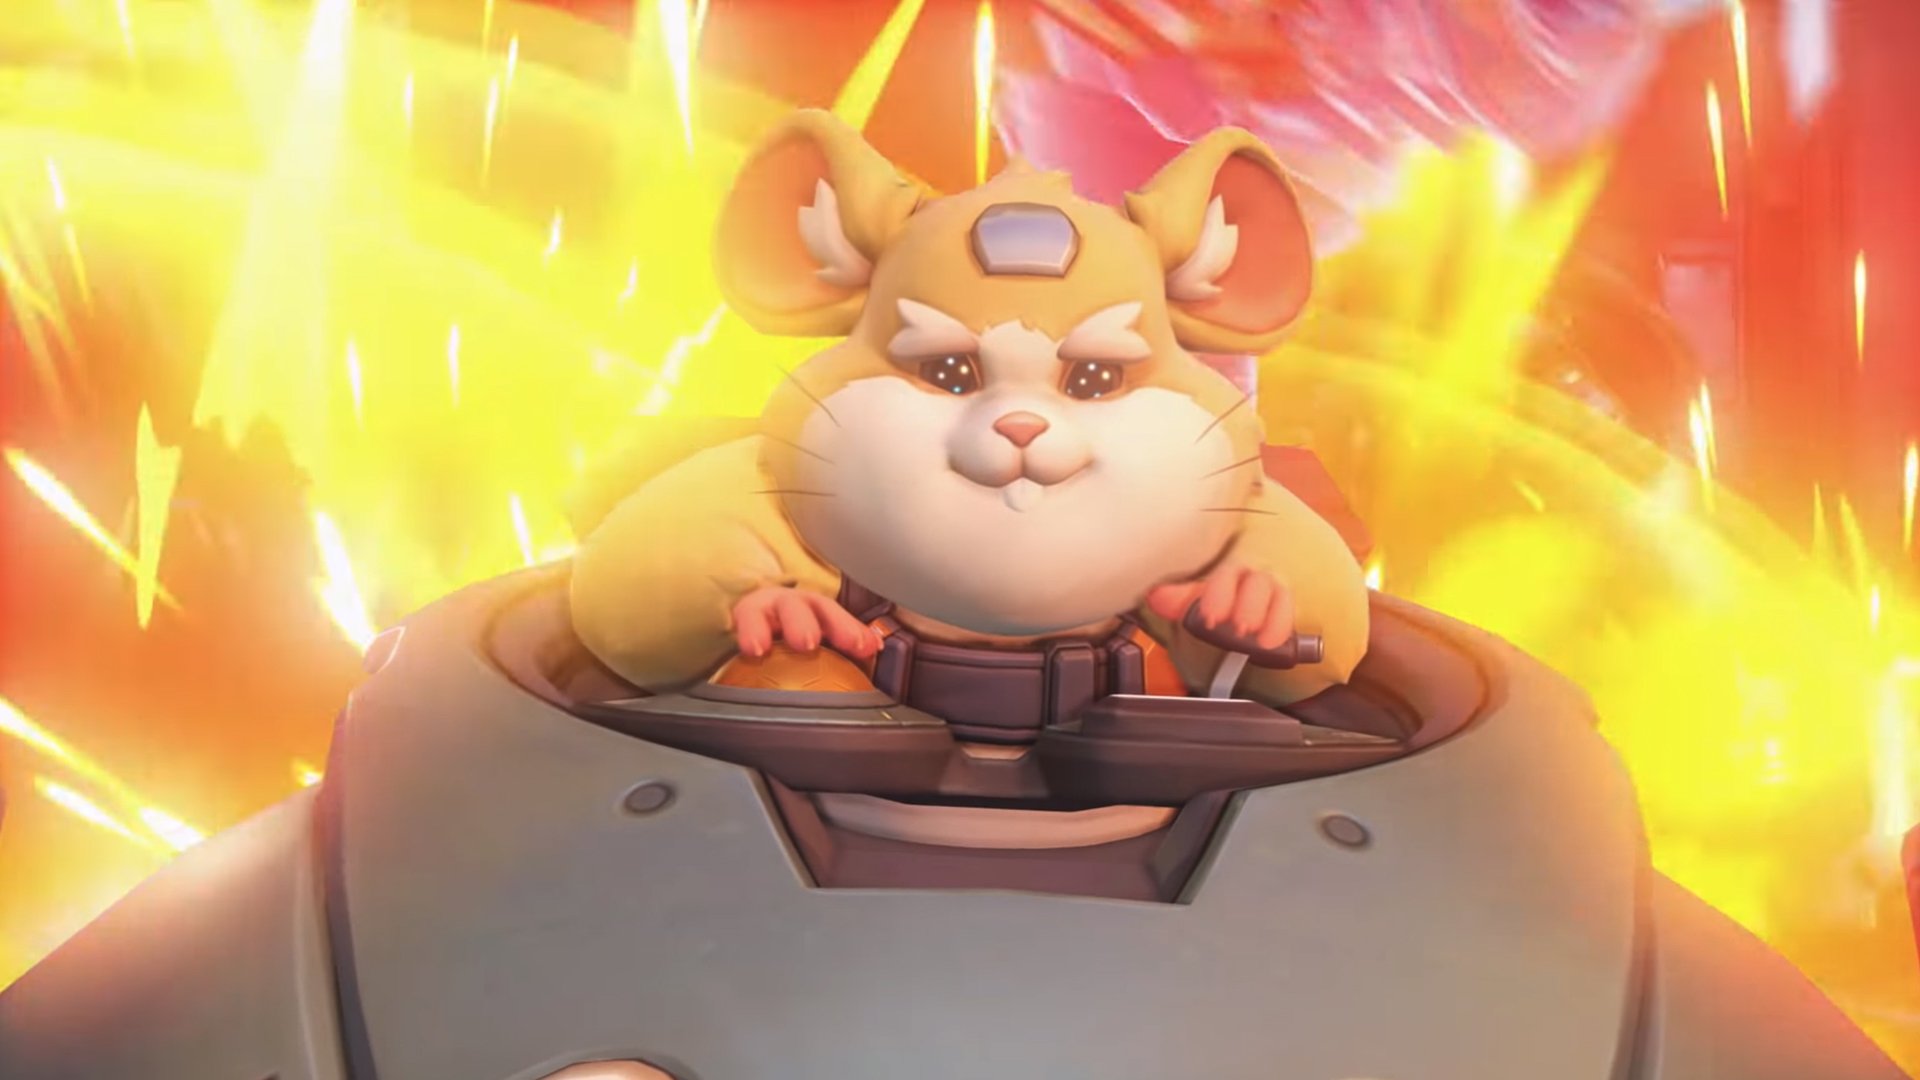 Wrecking Ball is live in Overwatch, and he looks like a fuzzy badass in the new trailer